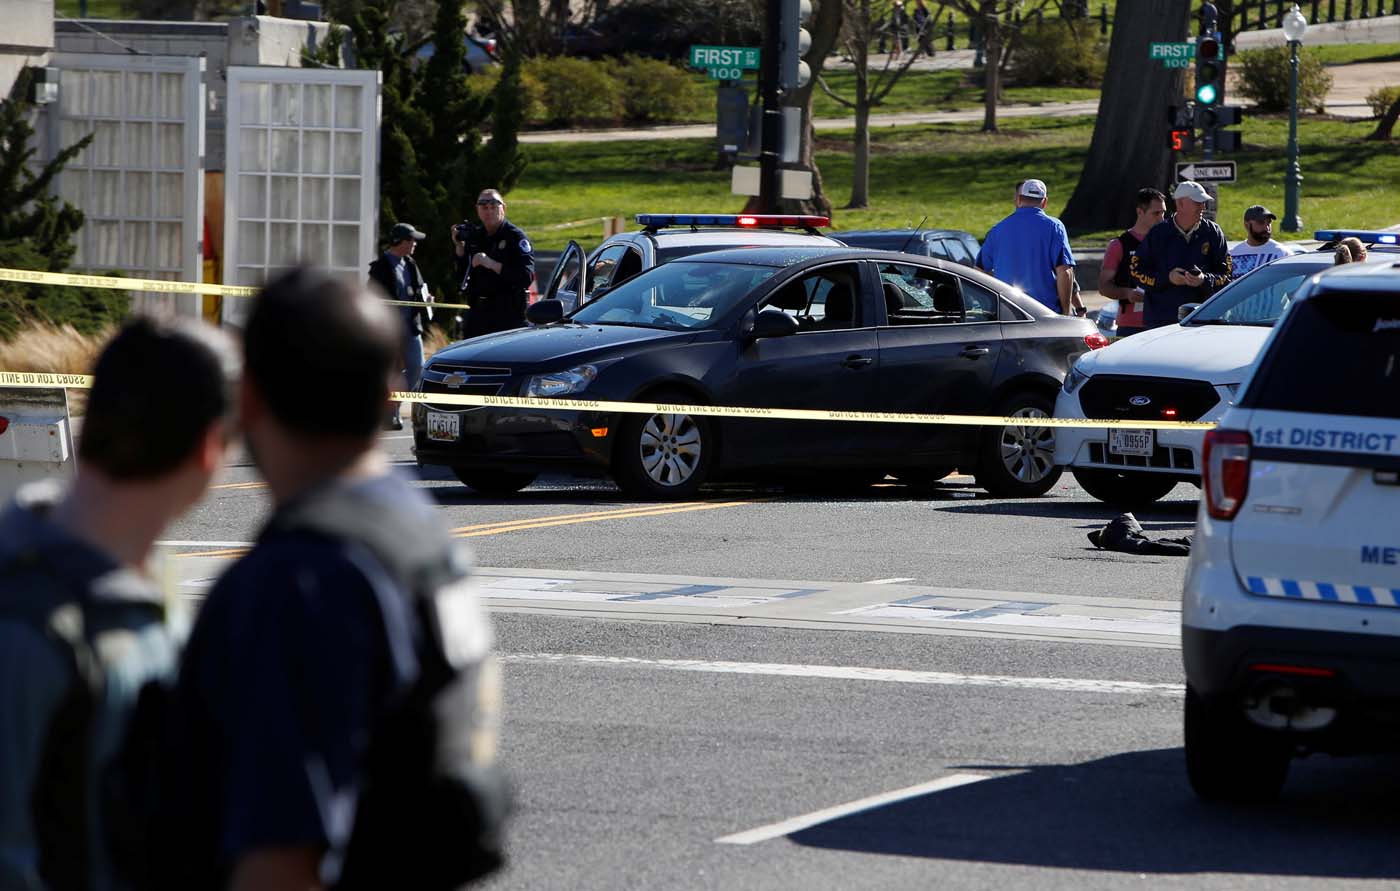 Capitol Hill police inspect a car whose driver struck a Capitol Police cruiser and then tried to run over officers, near the U.S. Capitol in Washington, U.S., March 29, 2017. REUTERS/Joshua Roberts